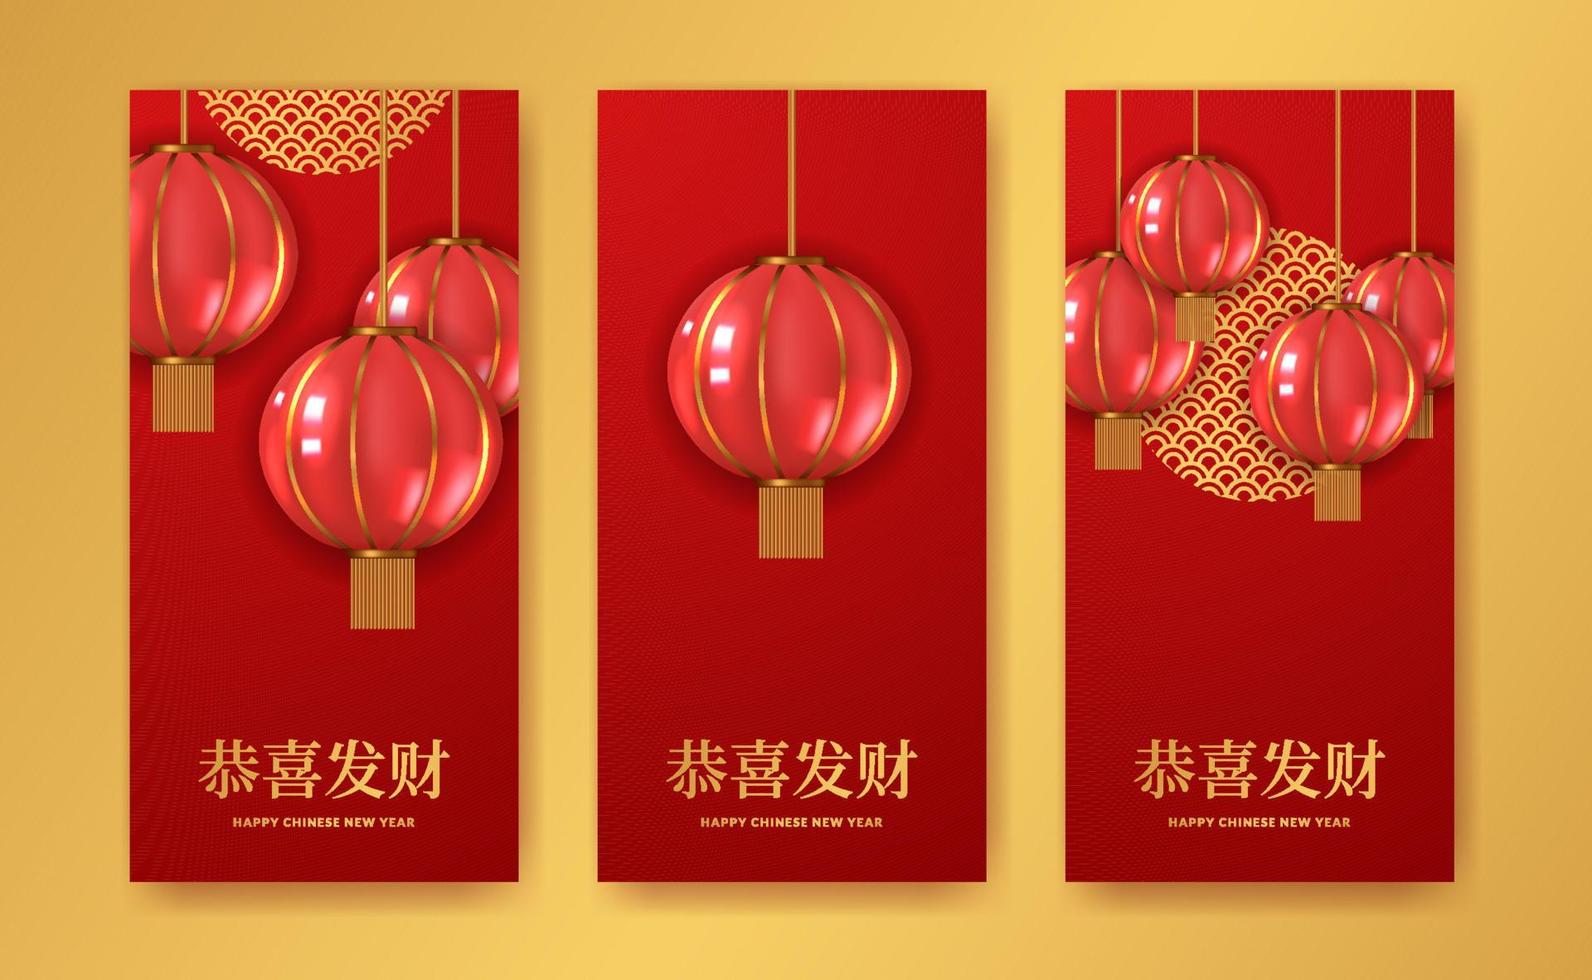 3d asian lantern for happy chinese new year for social media stories template with golden decoration vector